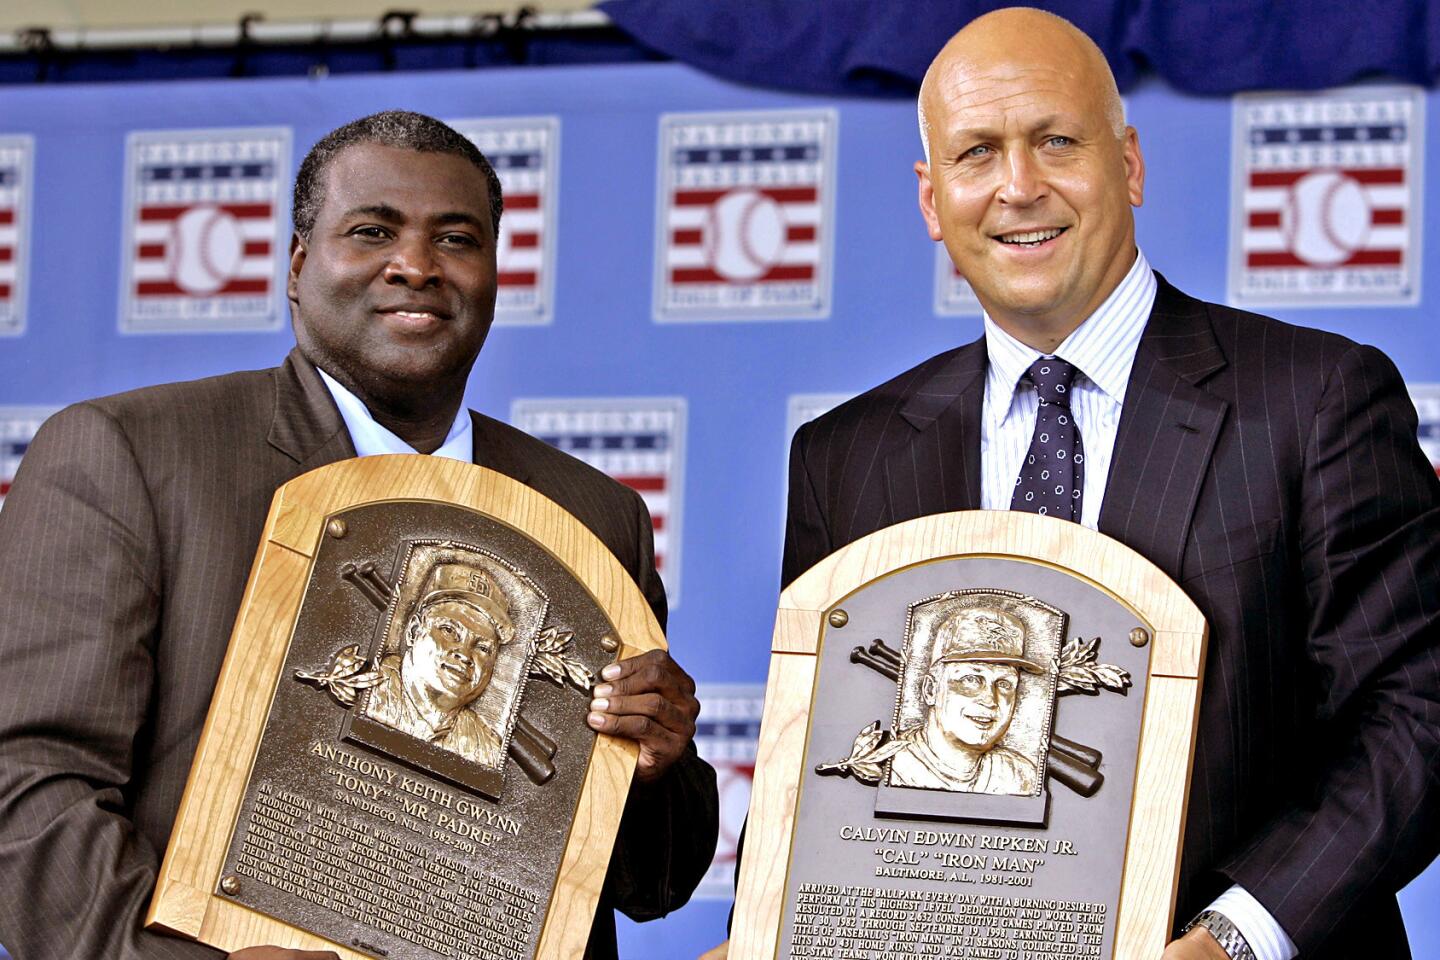 Tony Gwynn Dies at 54; Hall of Famer Was Mr. Padre, One of Best MLB Hitters  - Times of San Diego